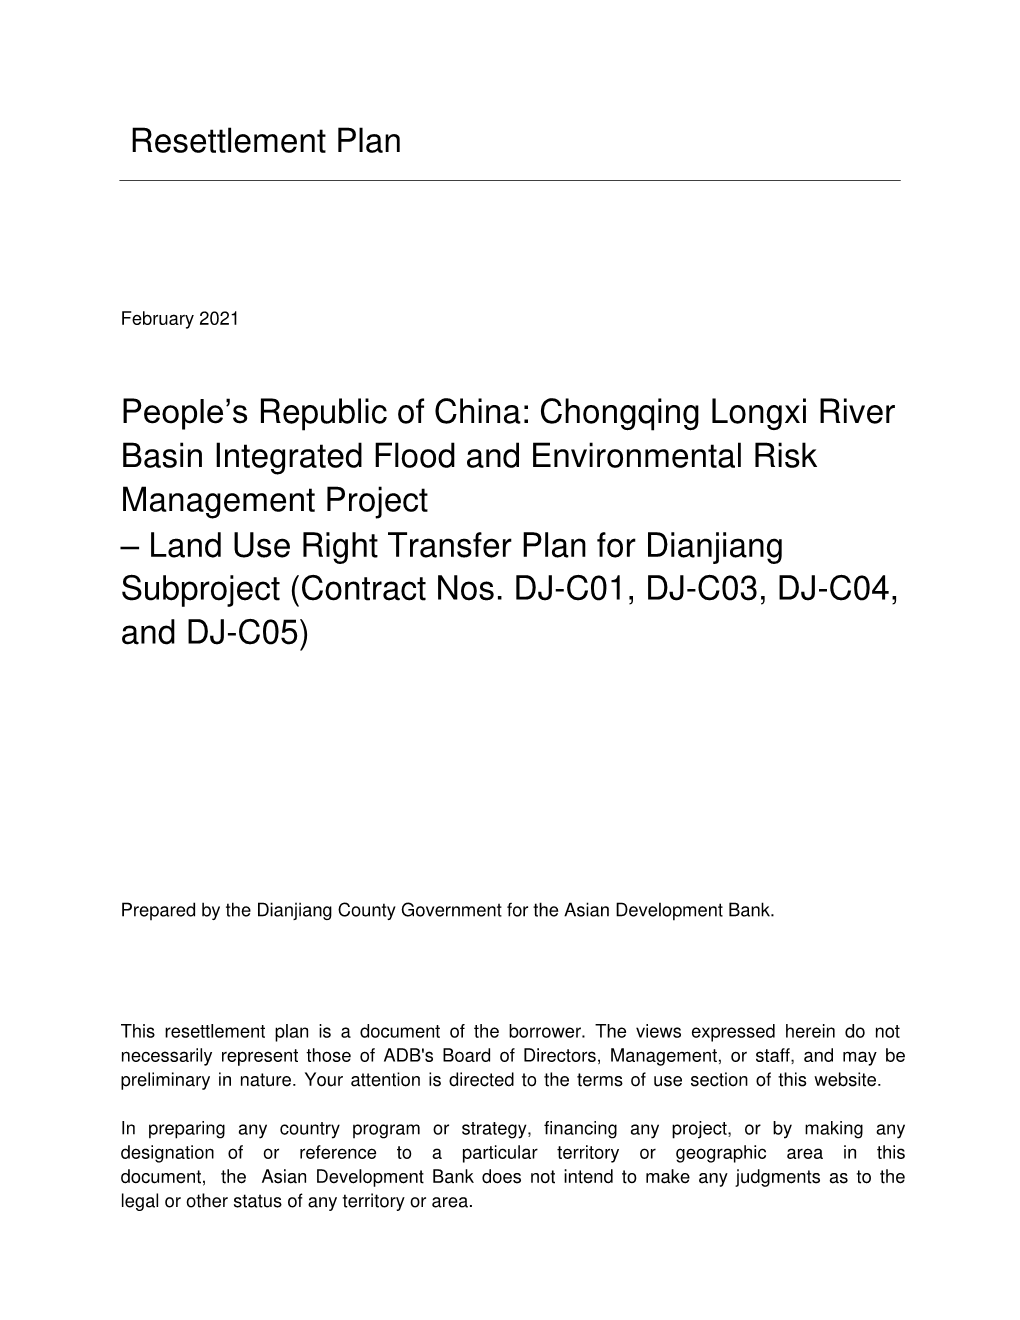 Chongqing Longxi River Basin Integrated Flood and Environmental Risk Management Project – Land Use Right Transfer Plan for Dianjiang Subproject (Contract Nos